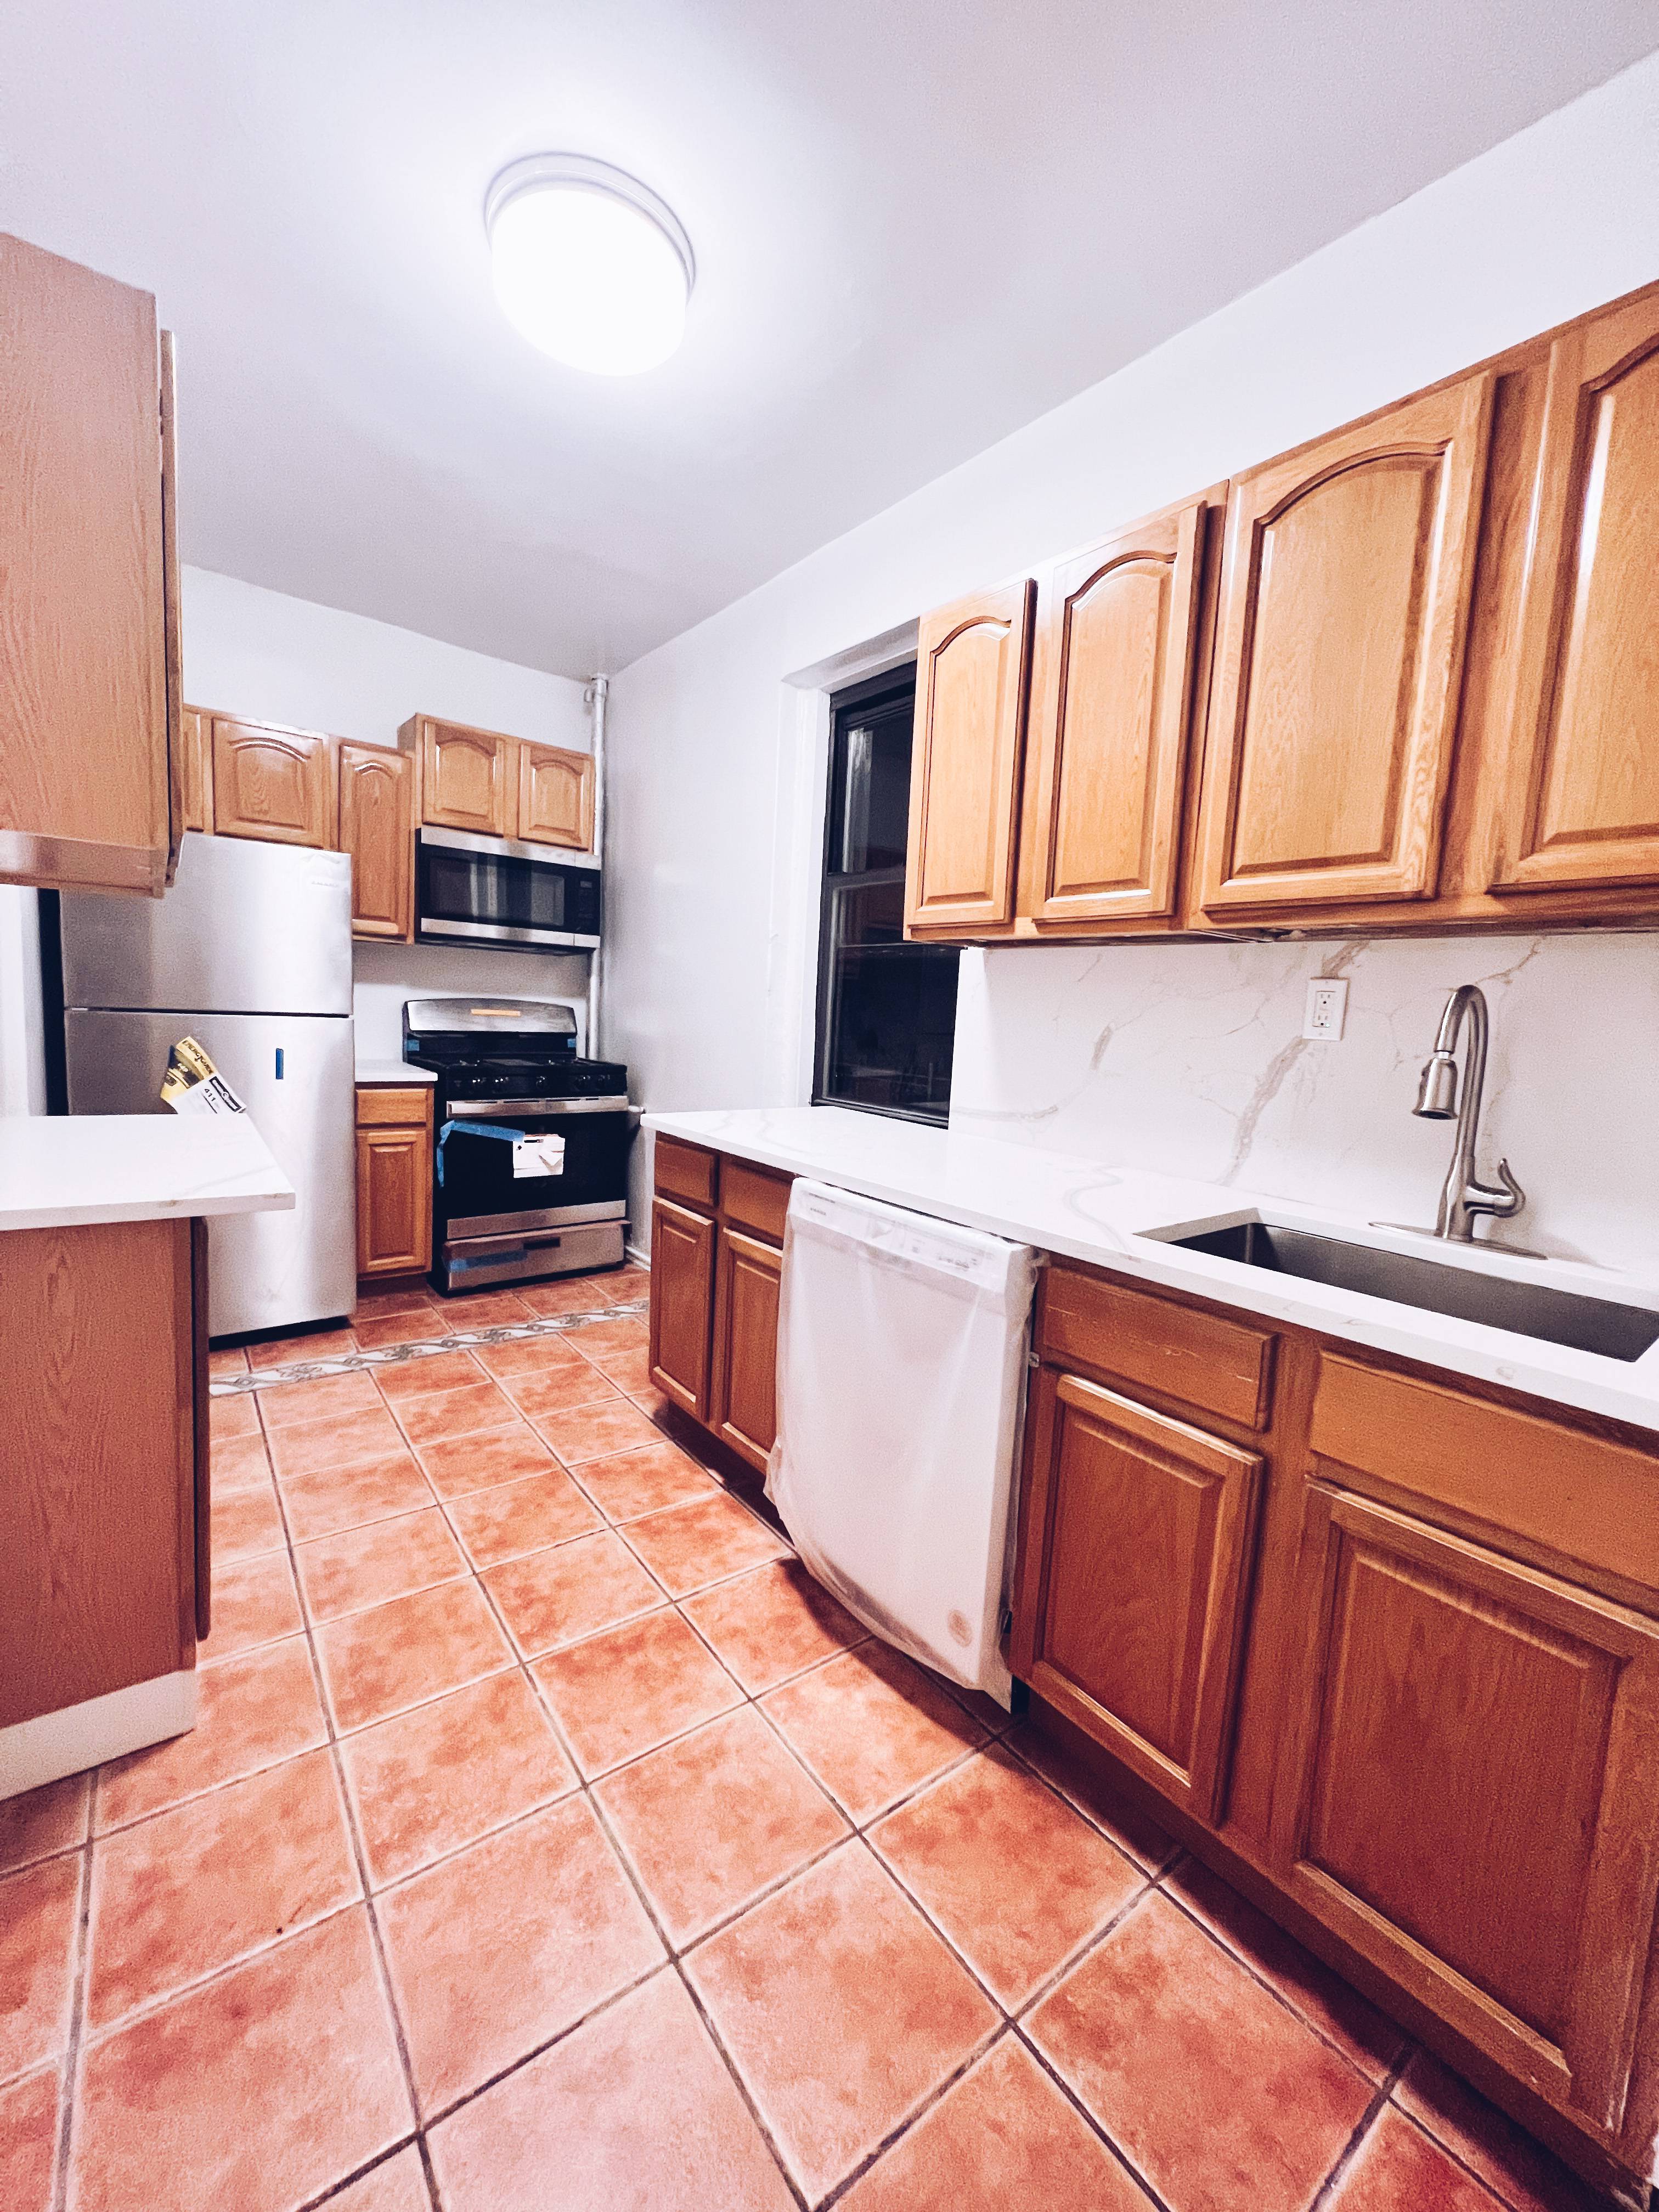 3 bedroom 2bath. Elevator, laundry room Dishwasher in a very large and separate kitchen with ample counter space and plenty of cabinet storage space.